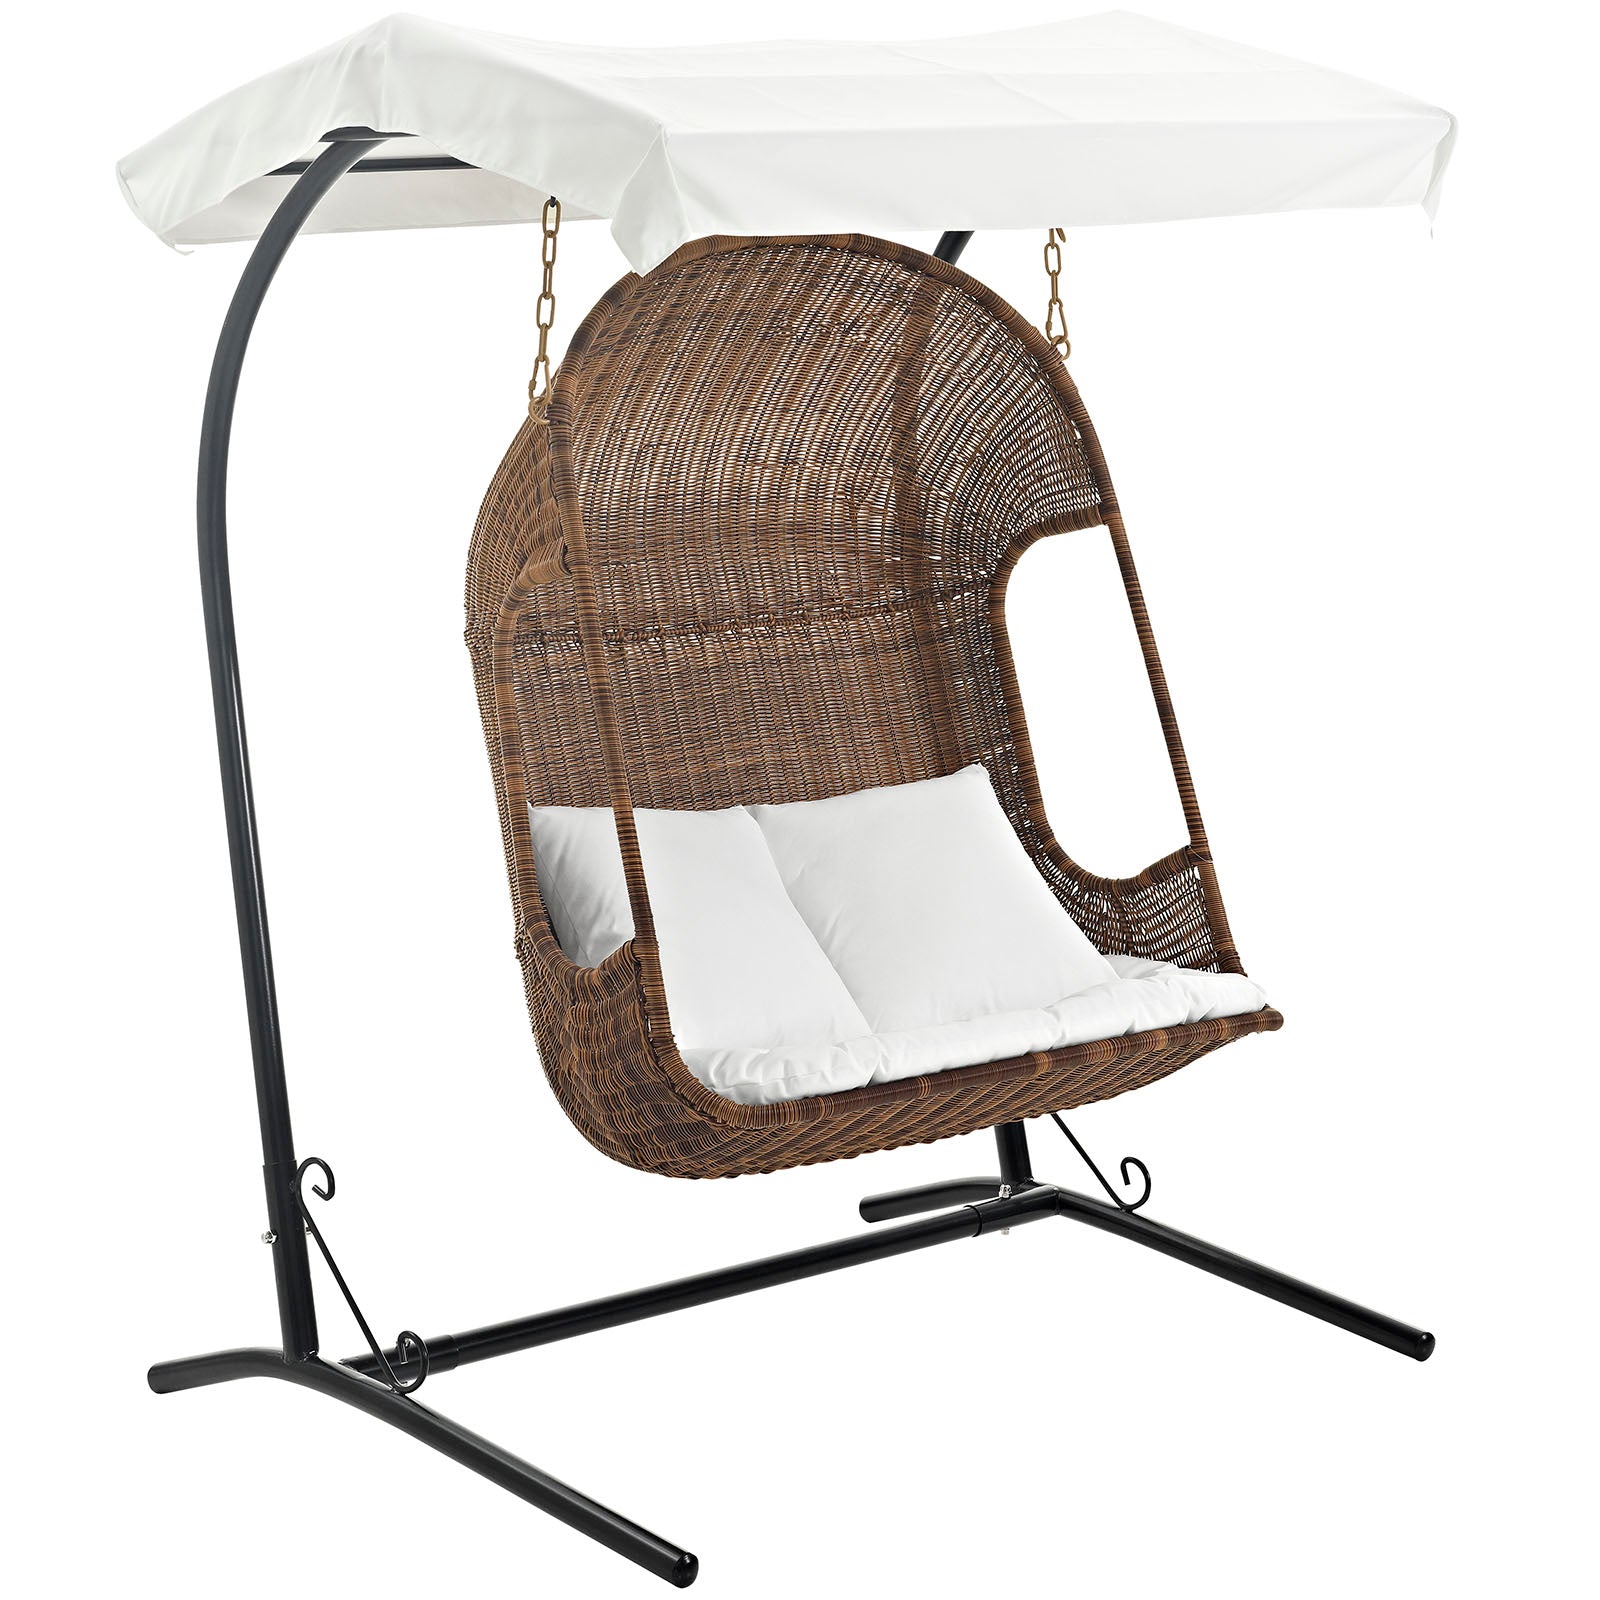 Modway Outdoor Swings - Vantage Outdoor Swing Chair With Stand Brown & White